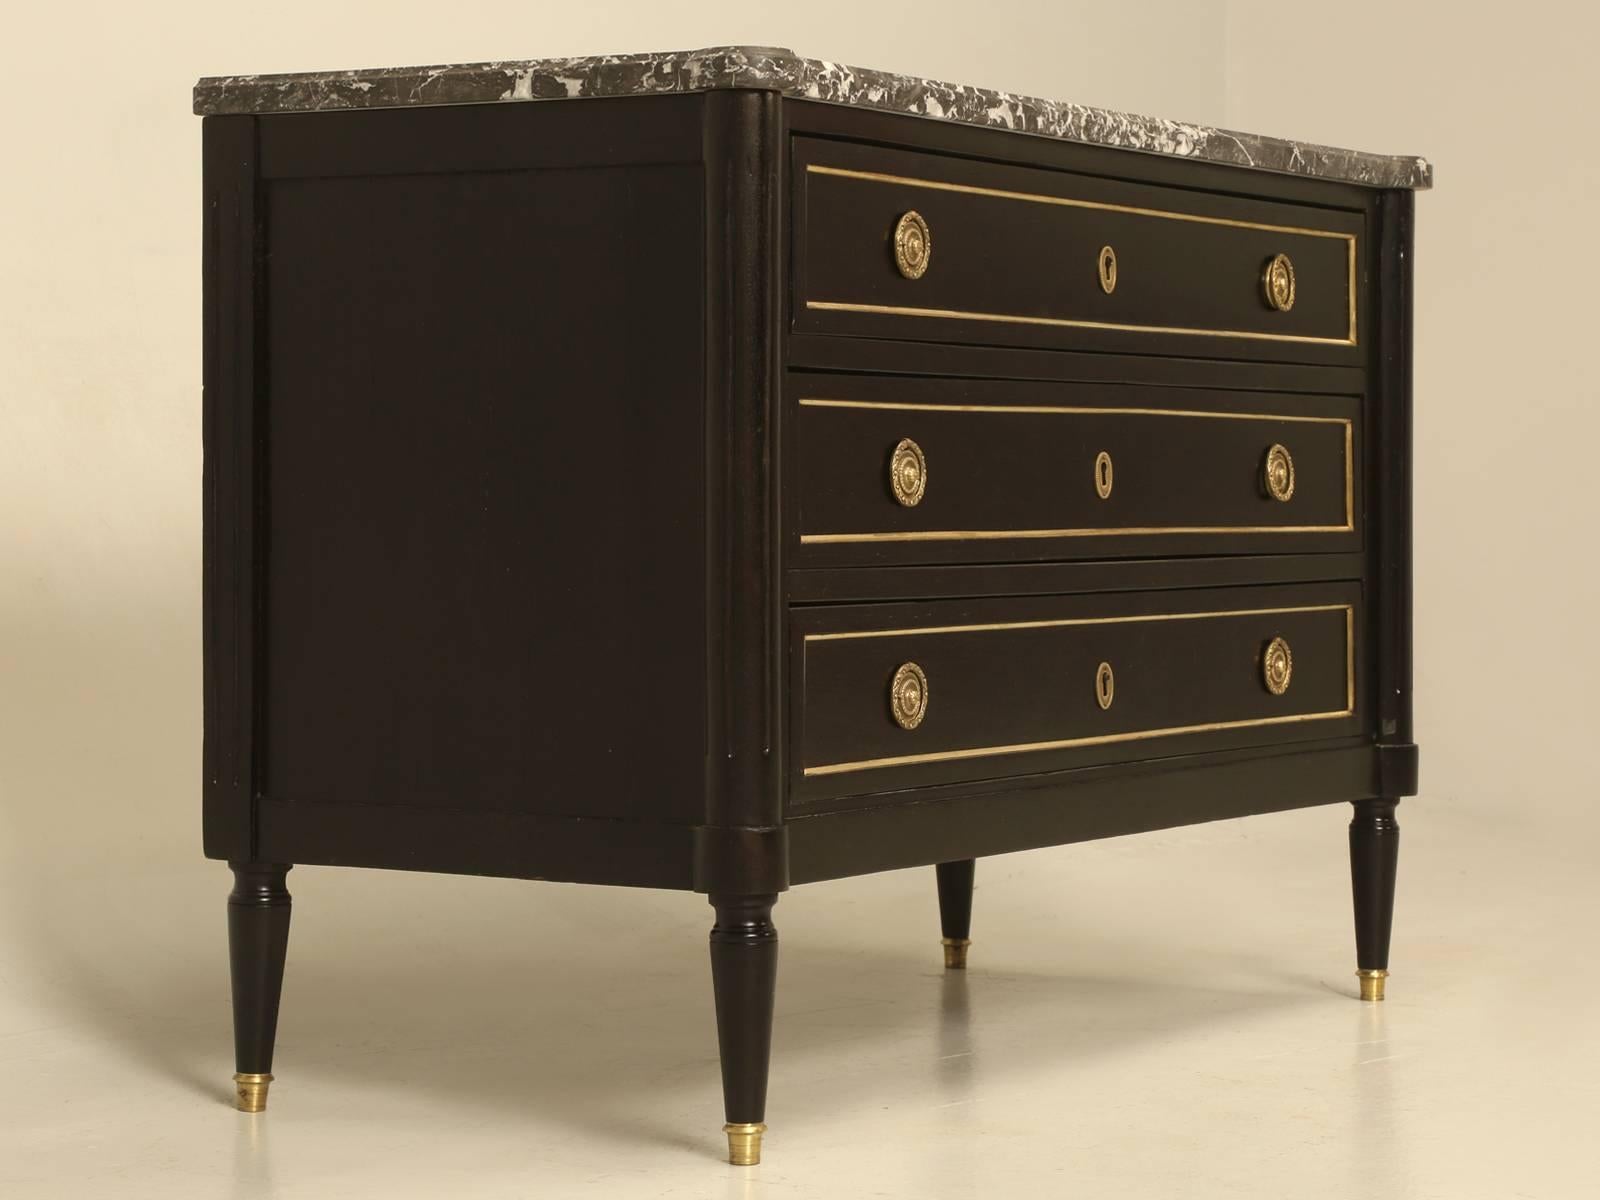 Antique French Louis XVI style ebonized commode. Our Old Plank restoration department restored this French Louis XVI commode from the bottom up and started by rebuilding the case, each drawer and hand-scraping the old finish off. Our finishing